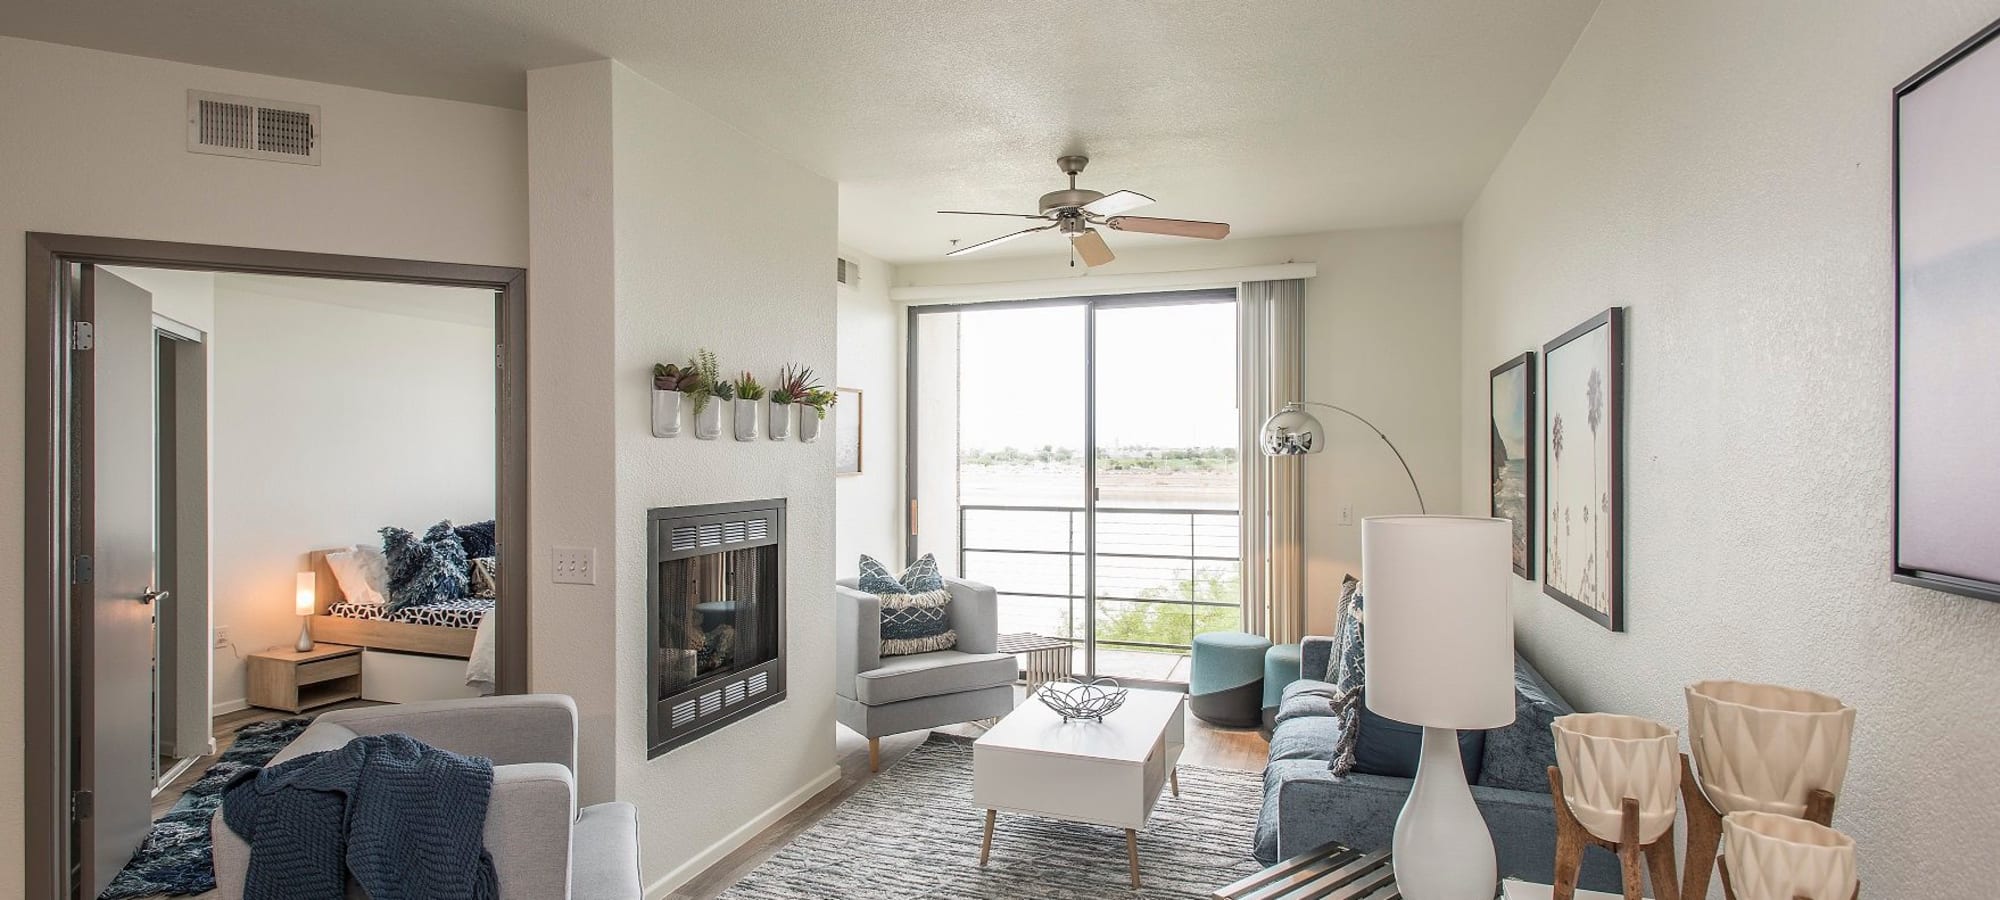 Bedroom, living room, and balcony overlooking Tempe Town Lake at Ten01 on the Lake in Tempe, Arizona